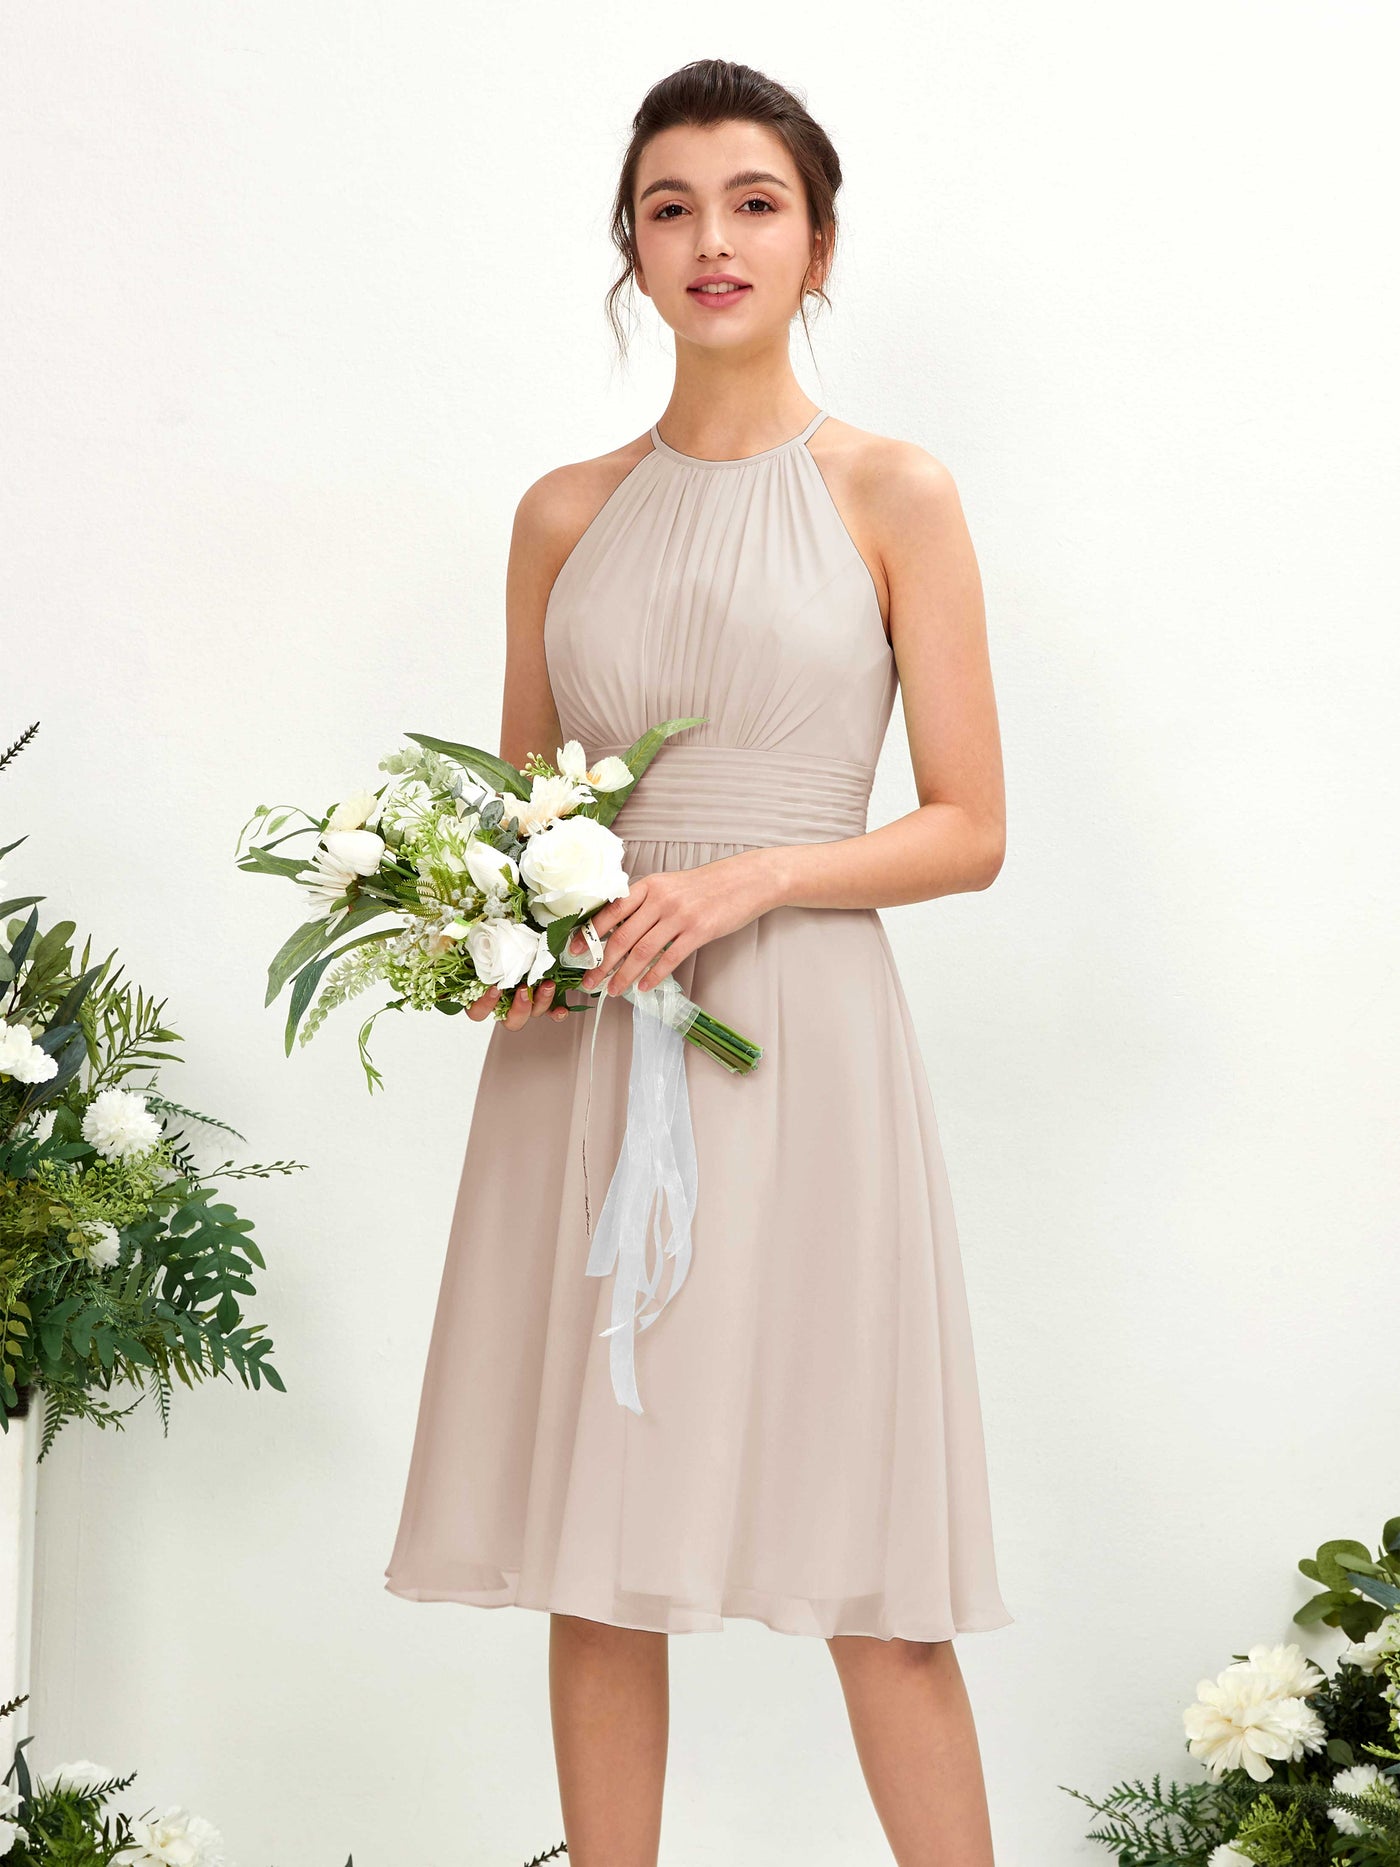 Champagne Bridesmaid Dresses Bridesmaid Dress A-line Chiffon Halter Knee Length Sleeveless Wedding Party Dress (81220116)#color_champagne